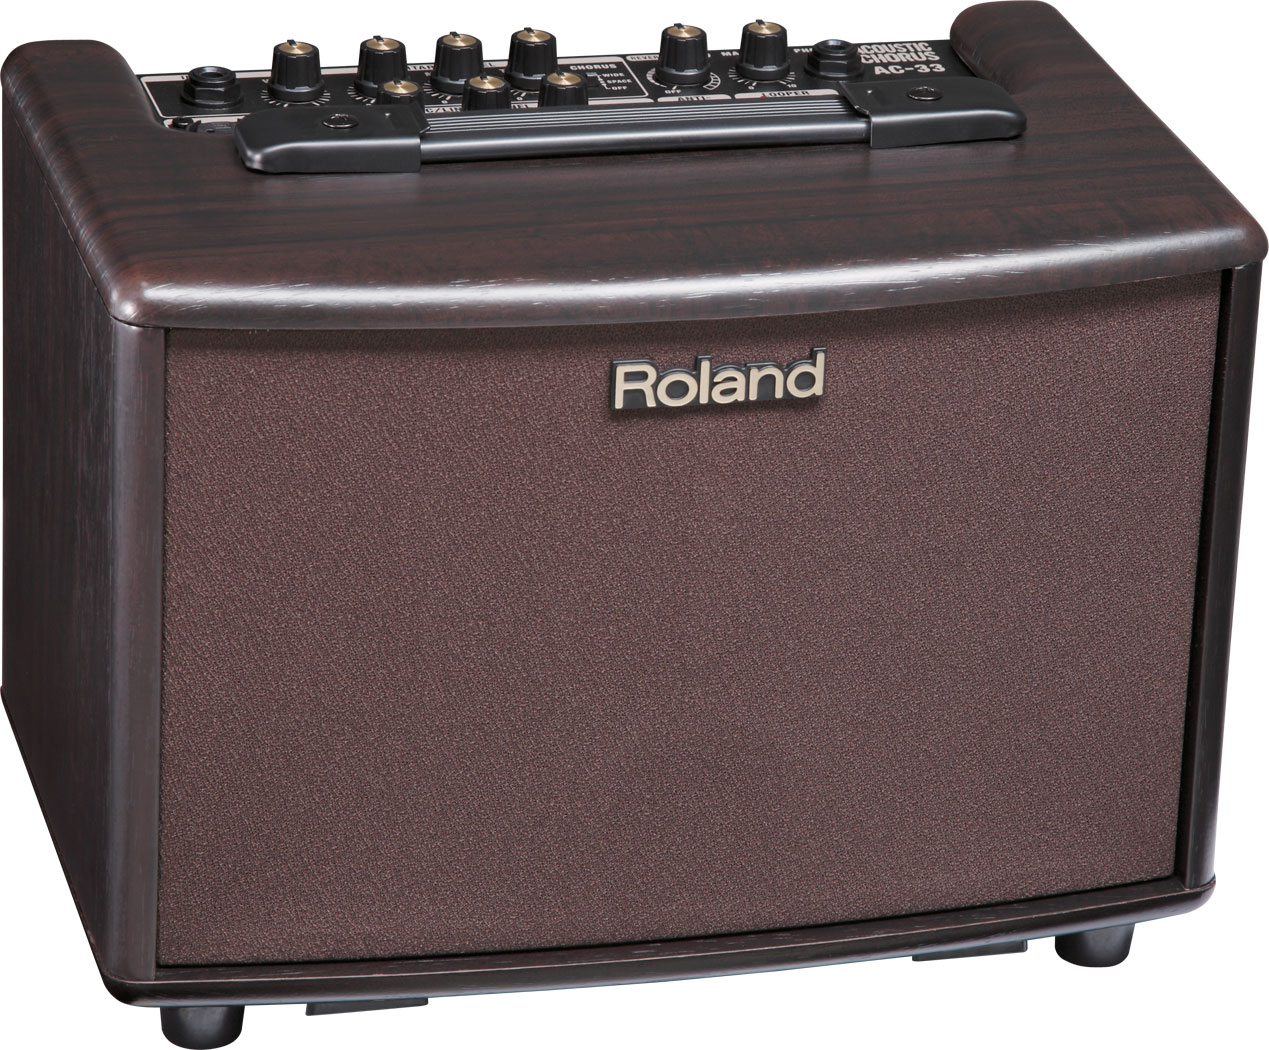 Leather Syn Roland Acoustic Chorus AC-33 Guitar Amplifier Dust Covers by DCFY Padded Prem 